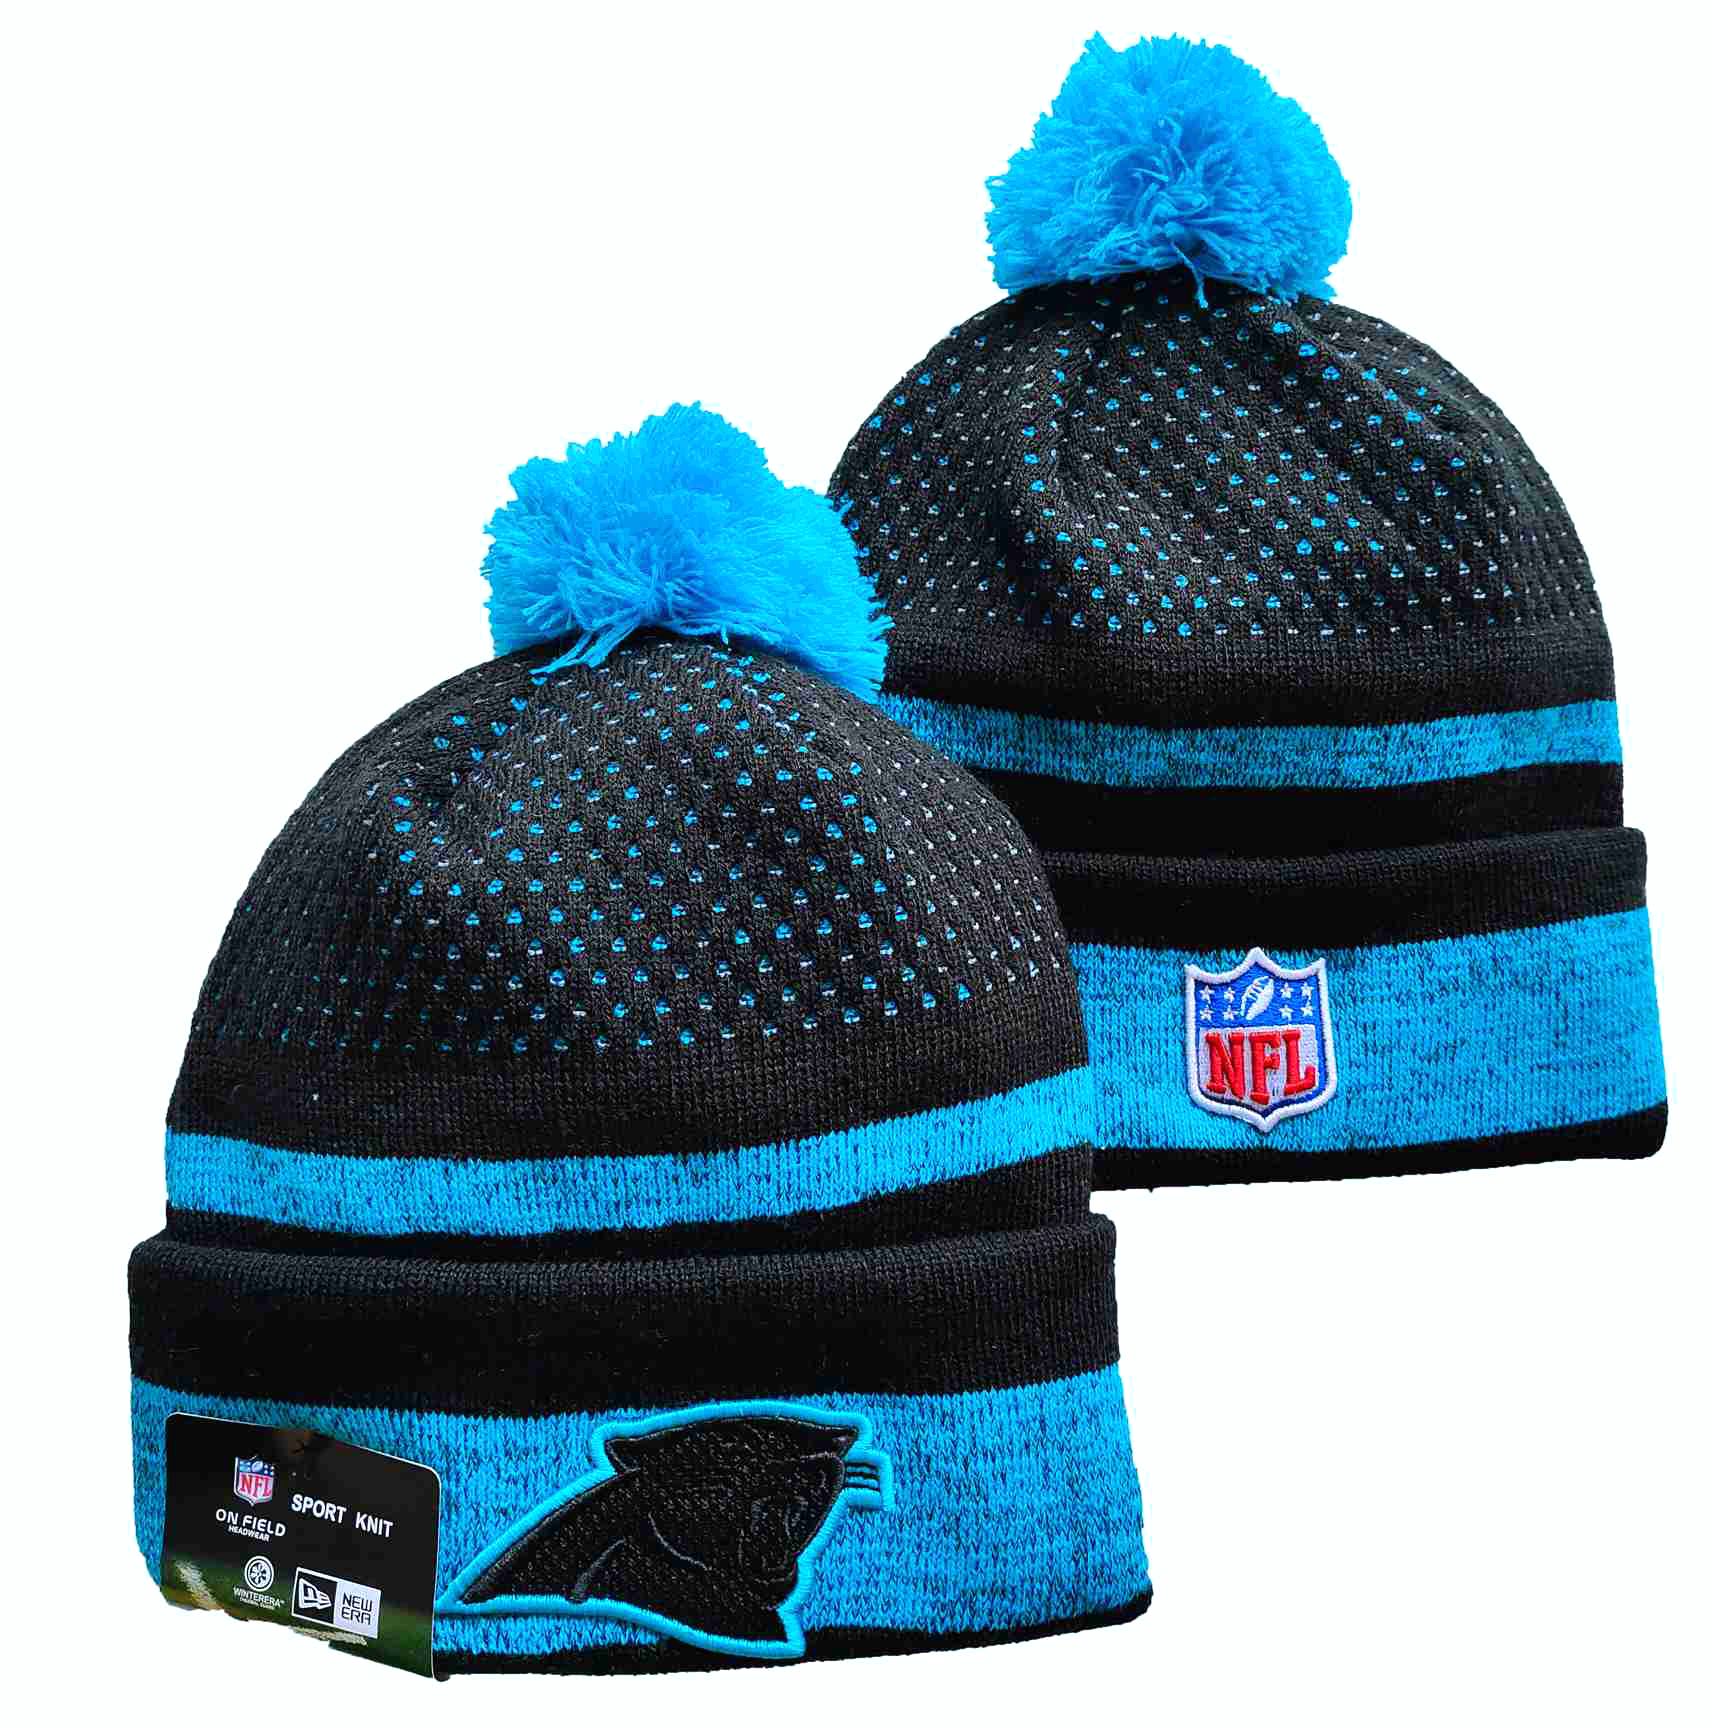 Panthers Team Logo Black and Blue Pom Cuffed Knit Hat YD